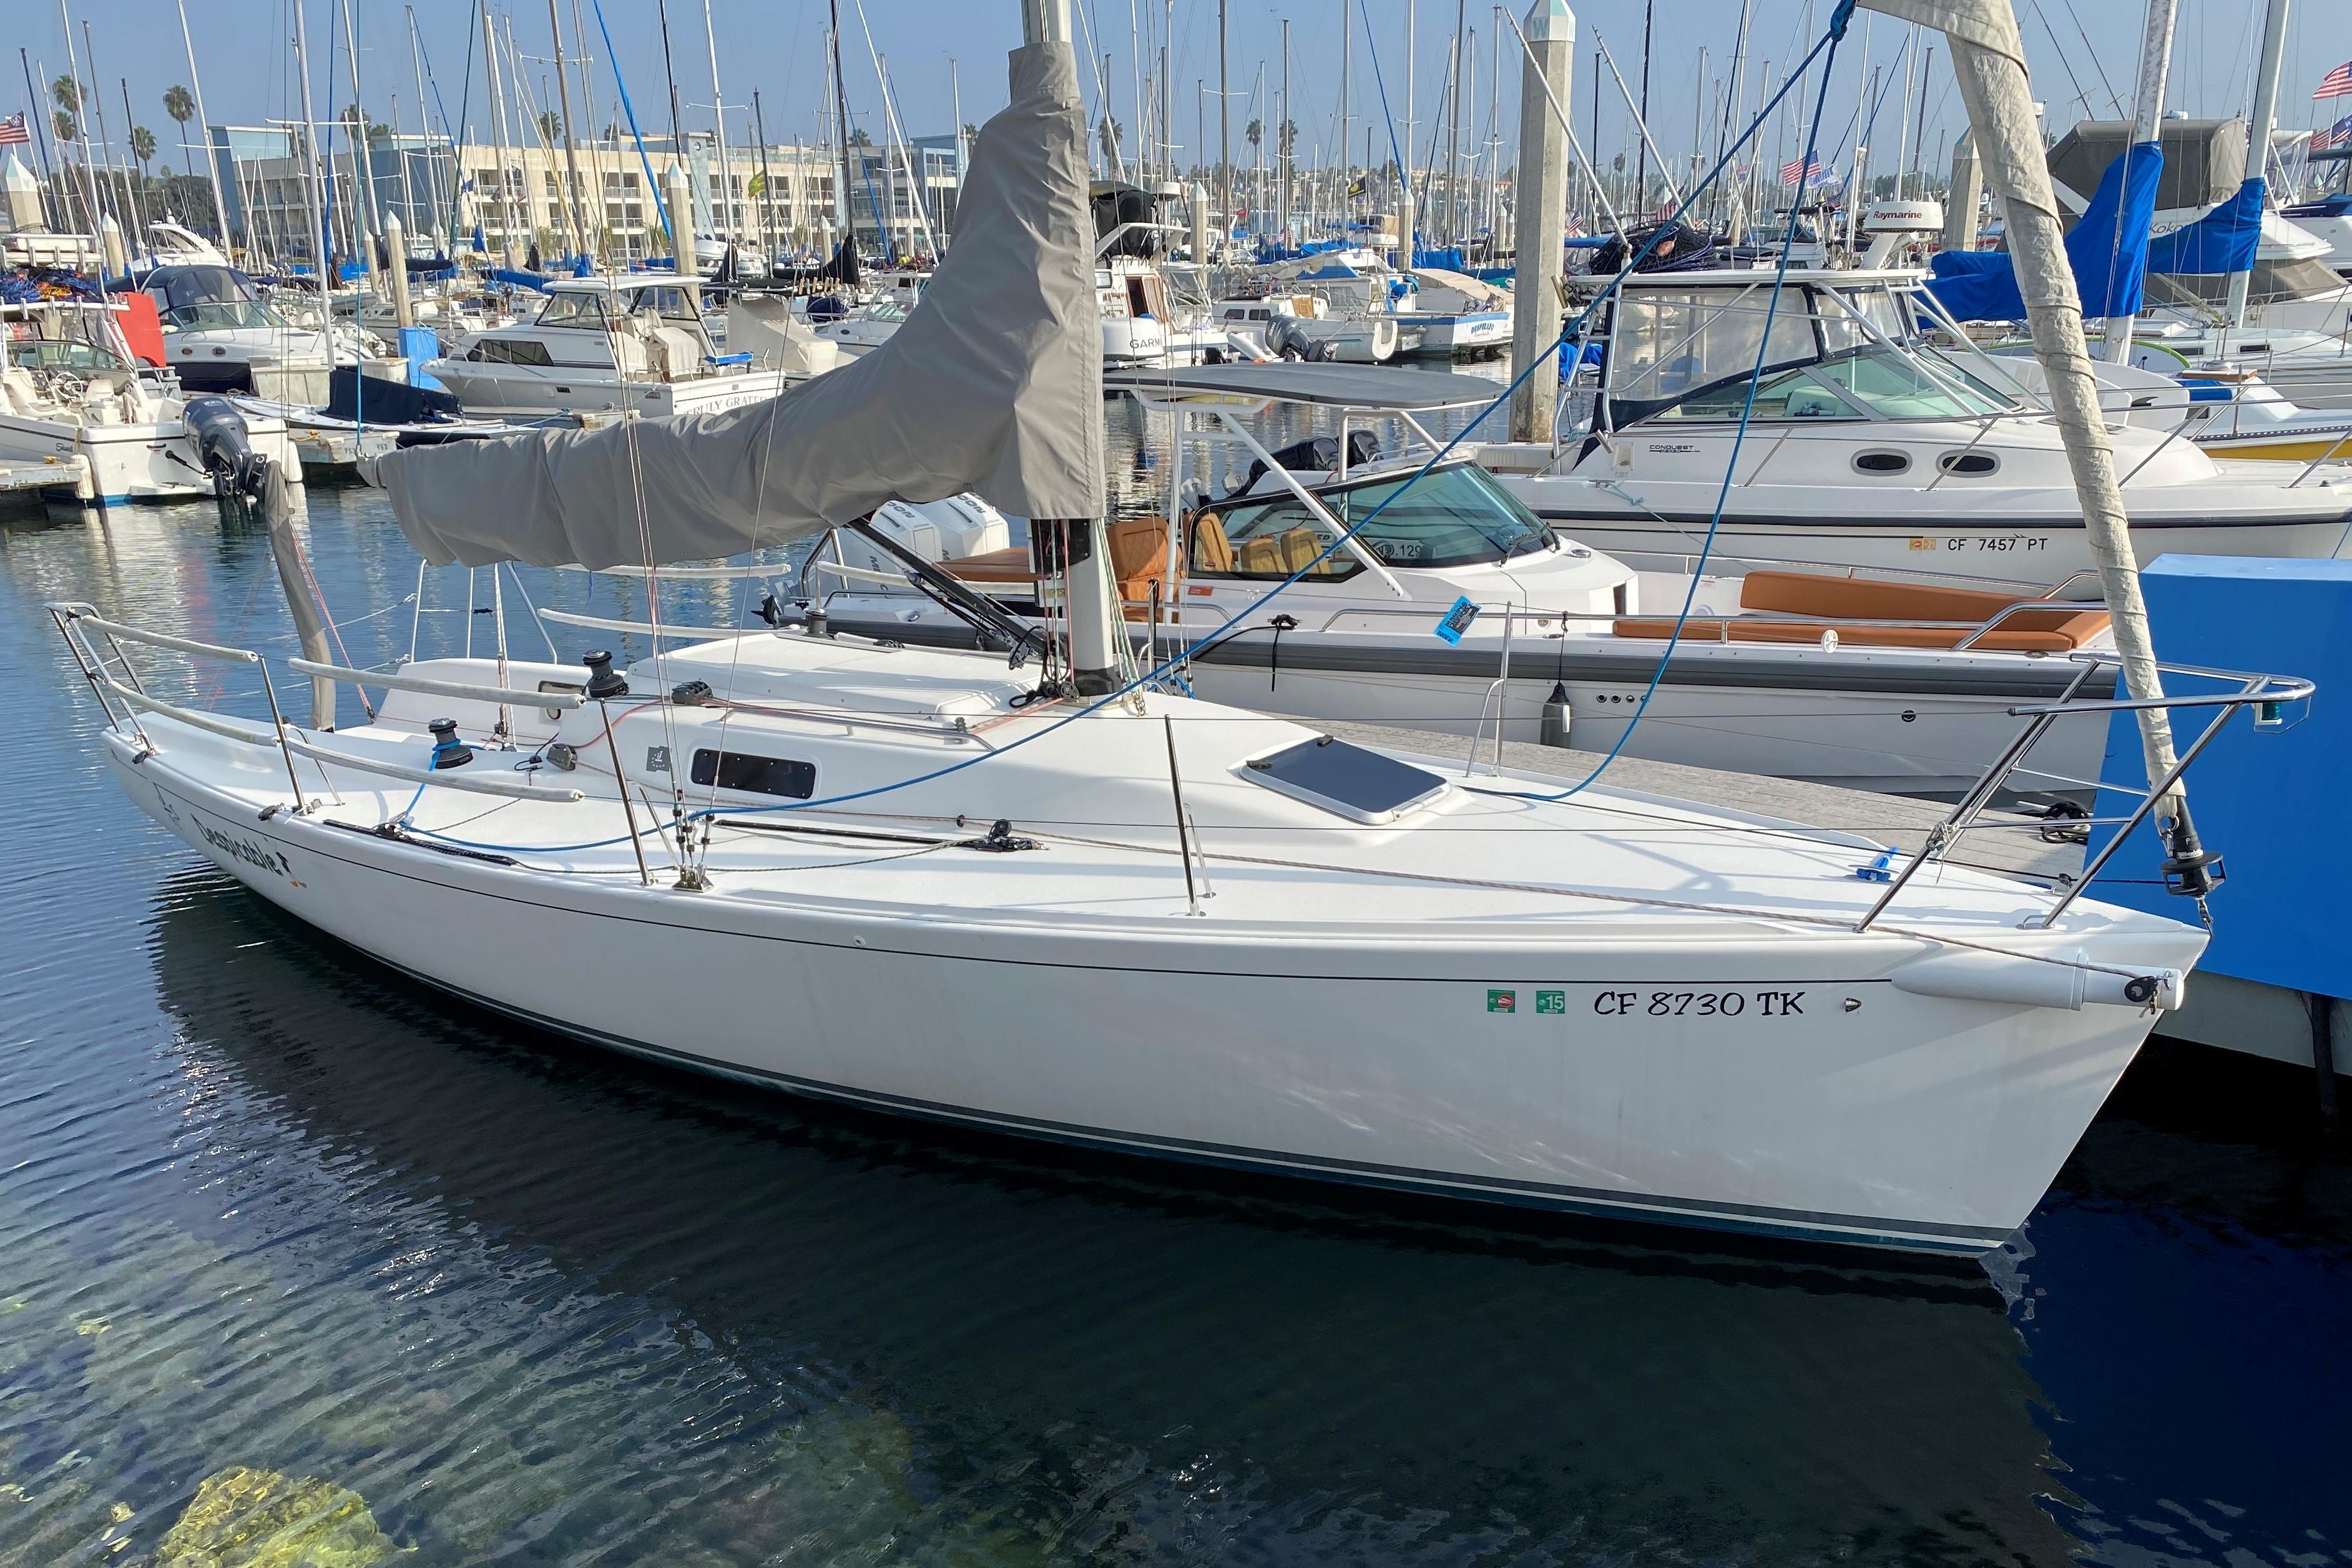 30 J Boats 07 Despicable Redondo Beach California Sold On 10 22 By Denison Yacht Sales